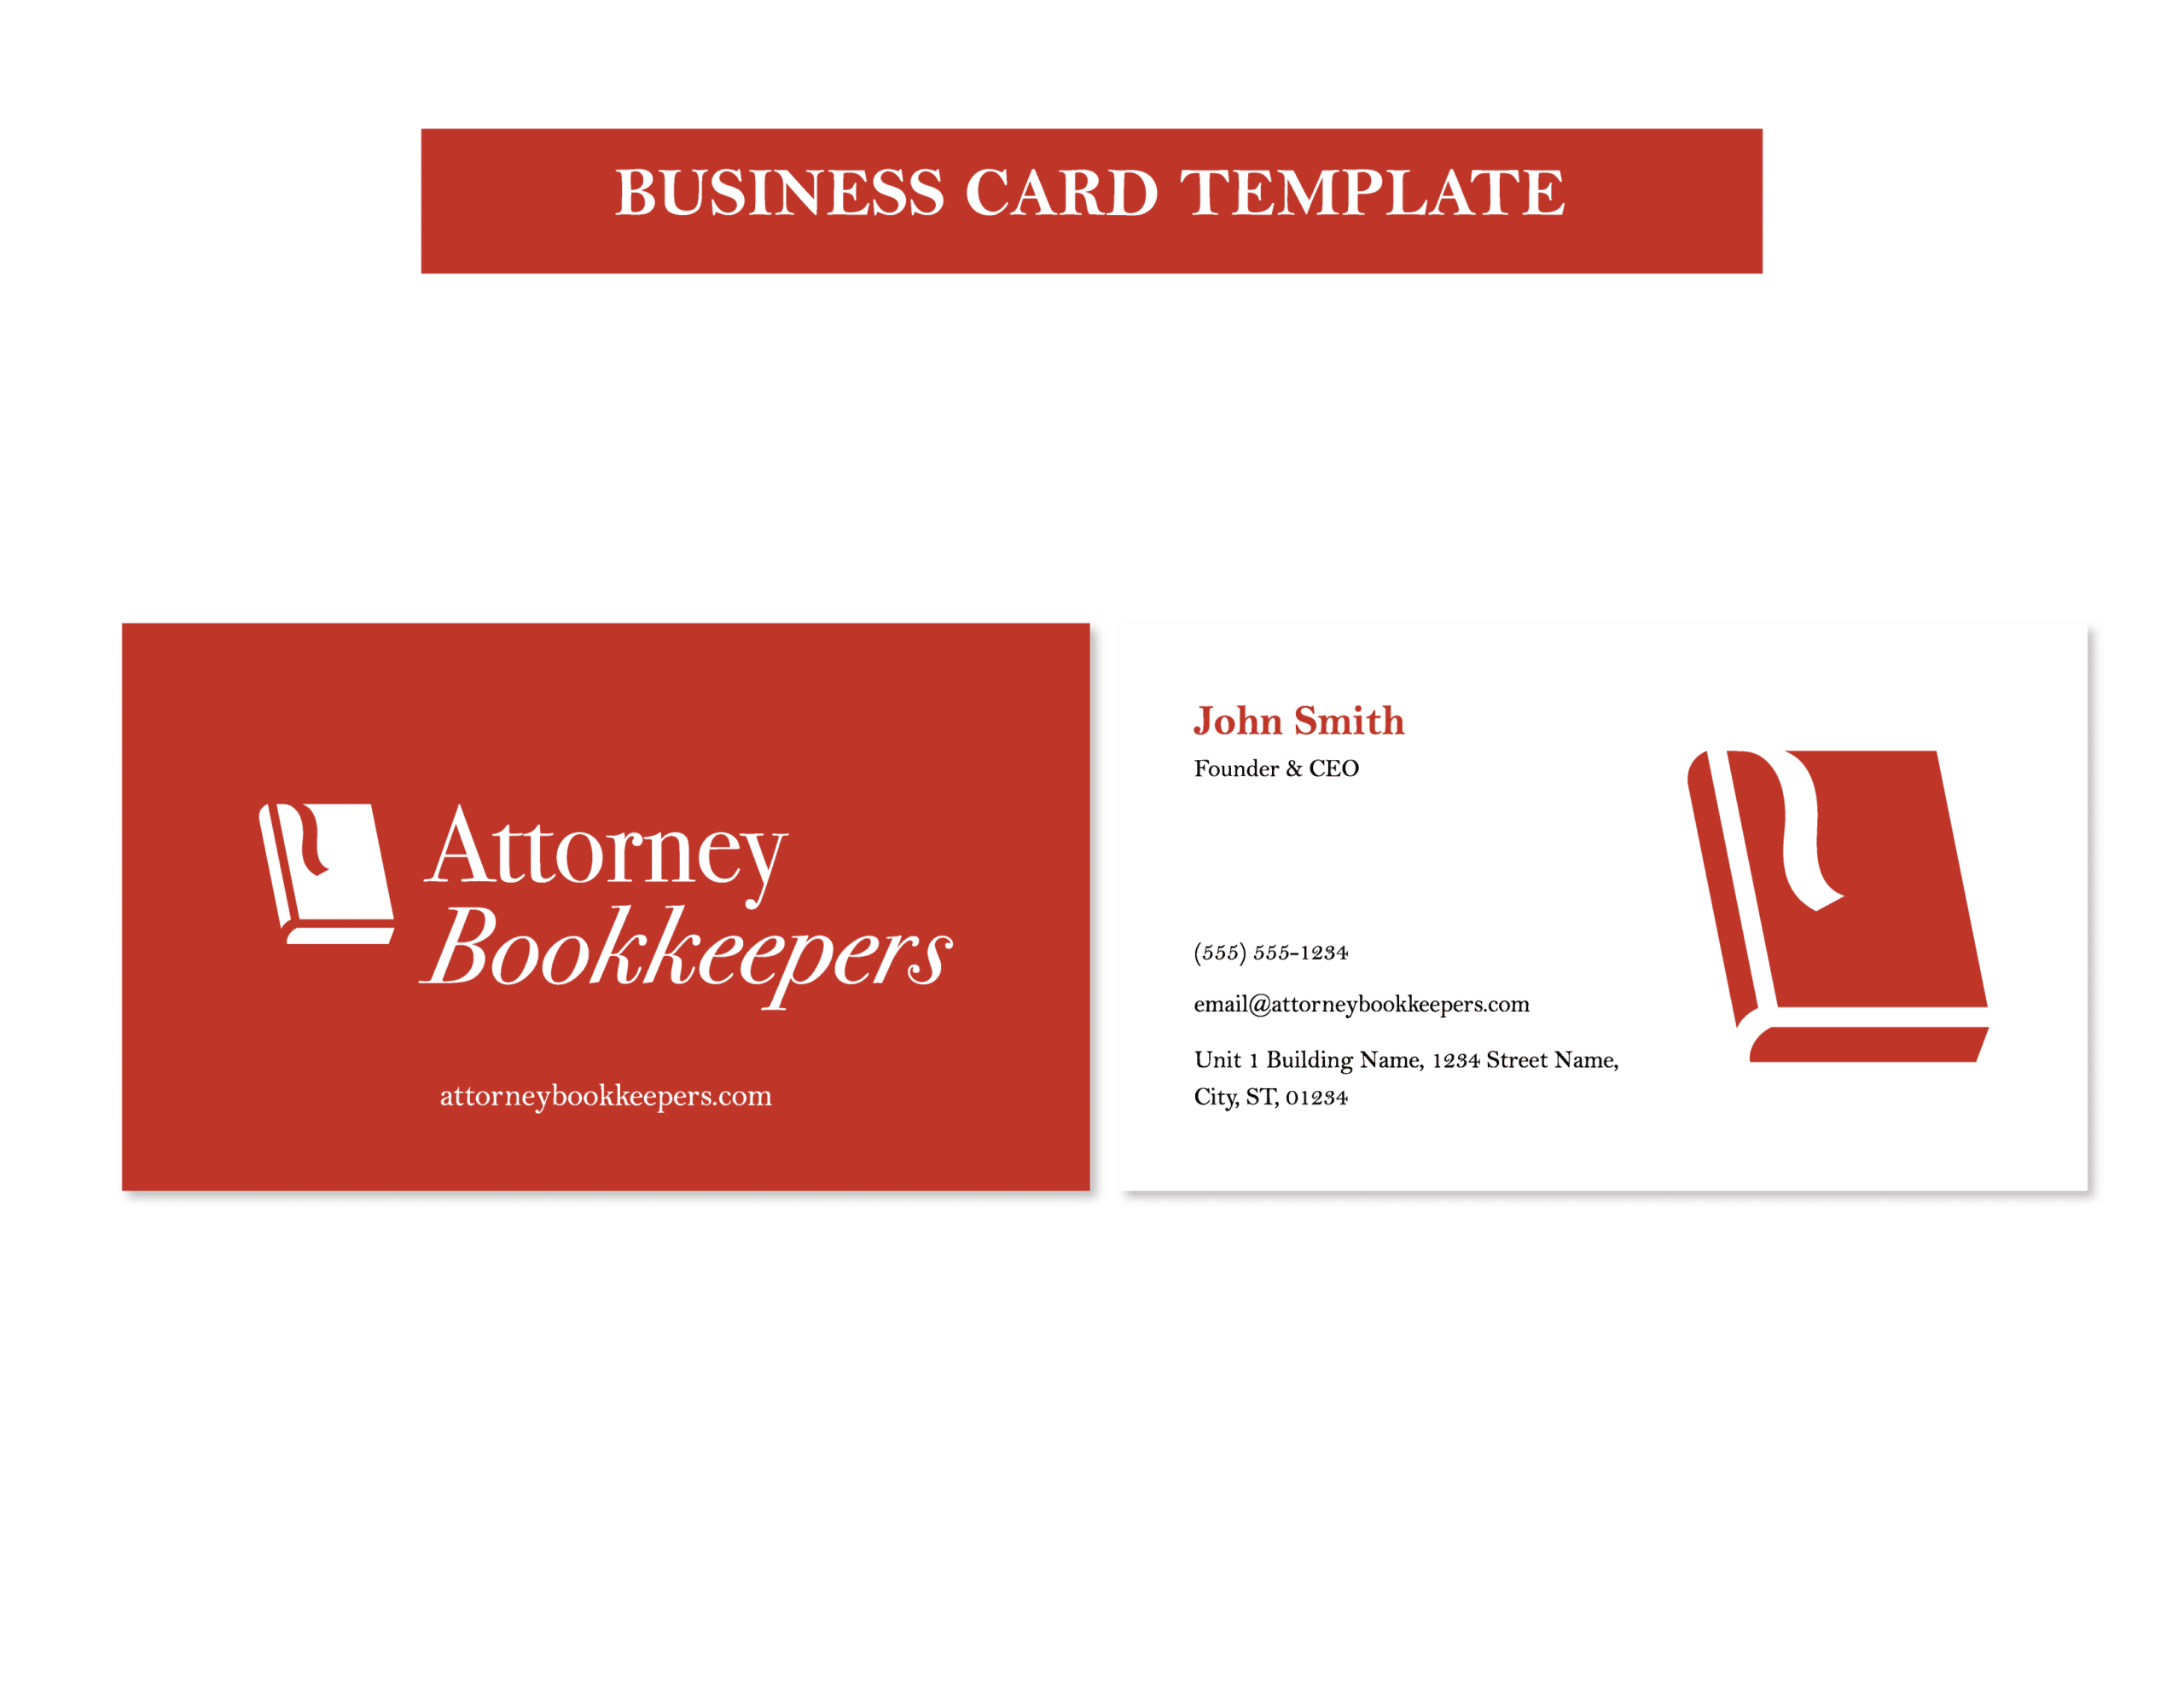 04AttorneyBookkeepERS_Showcase_Business Card Template